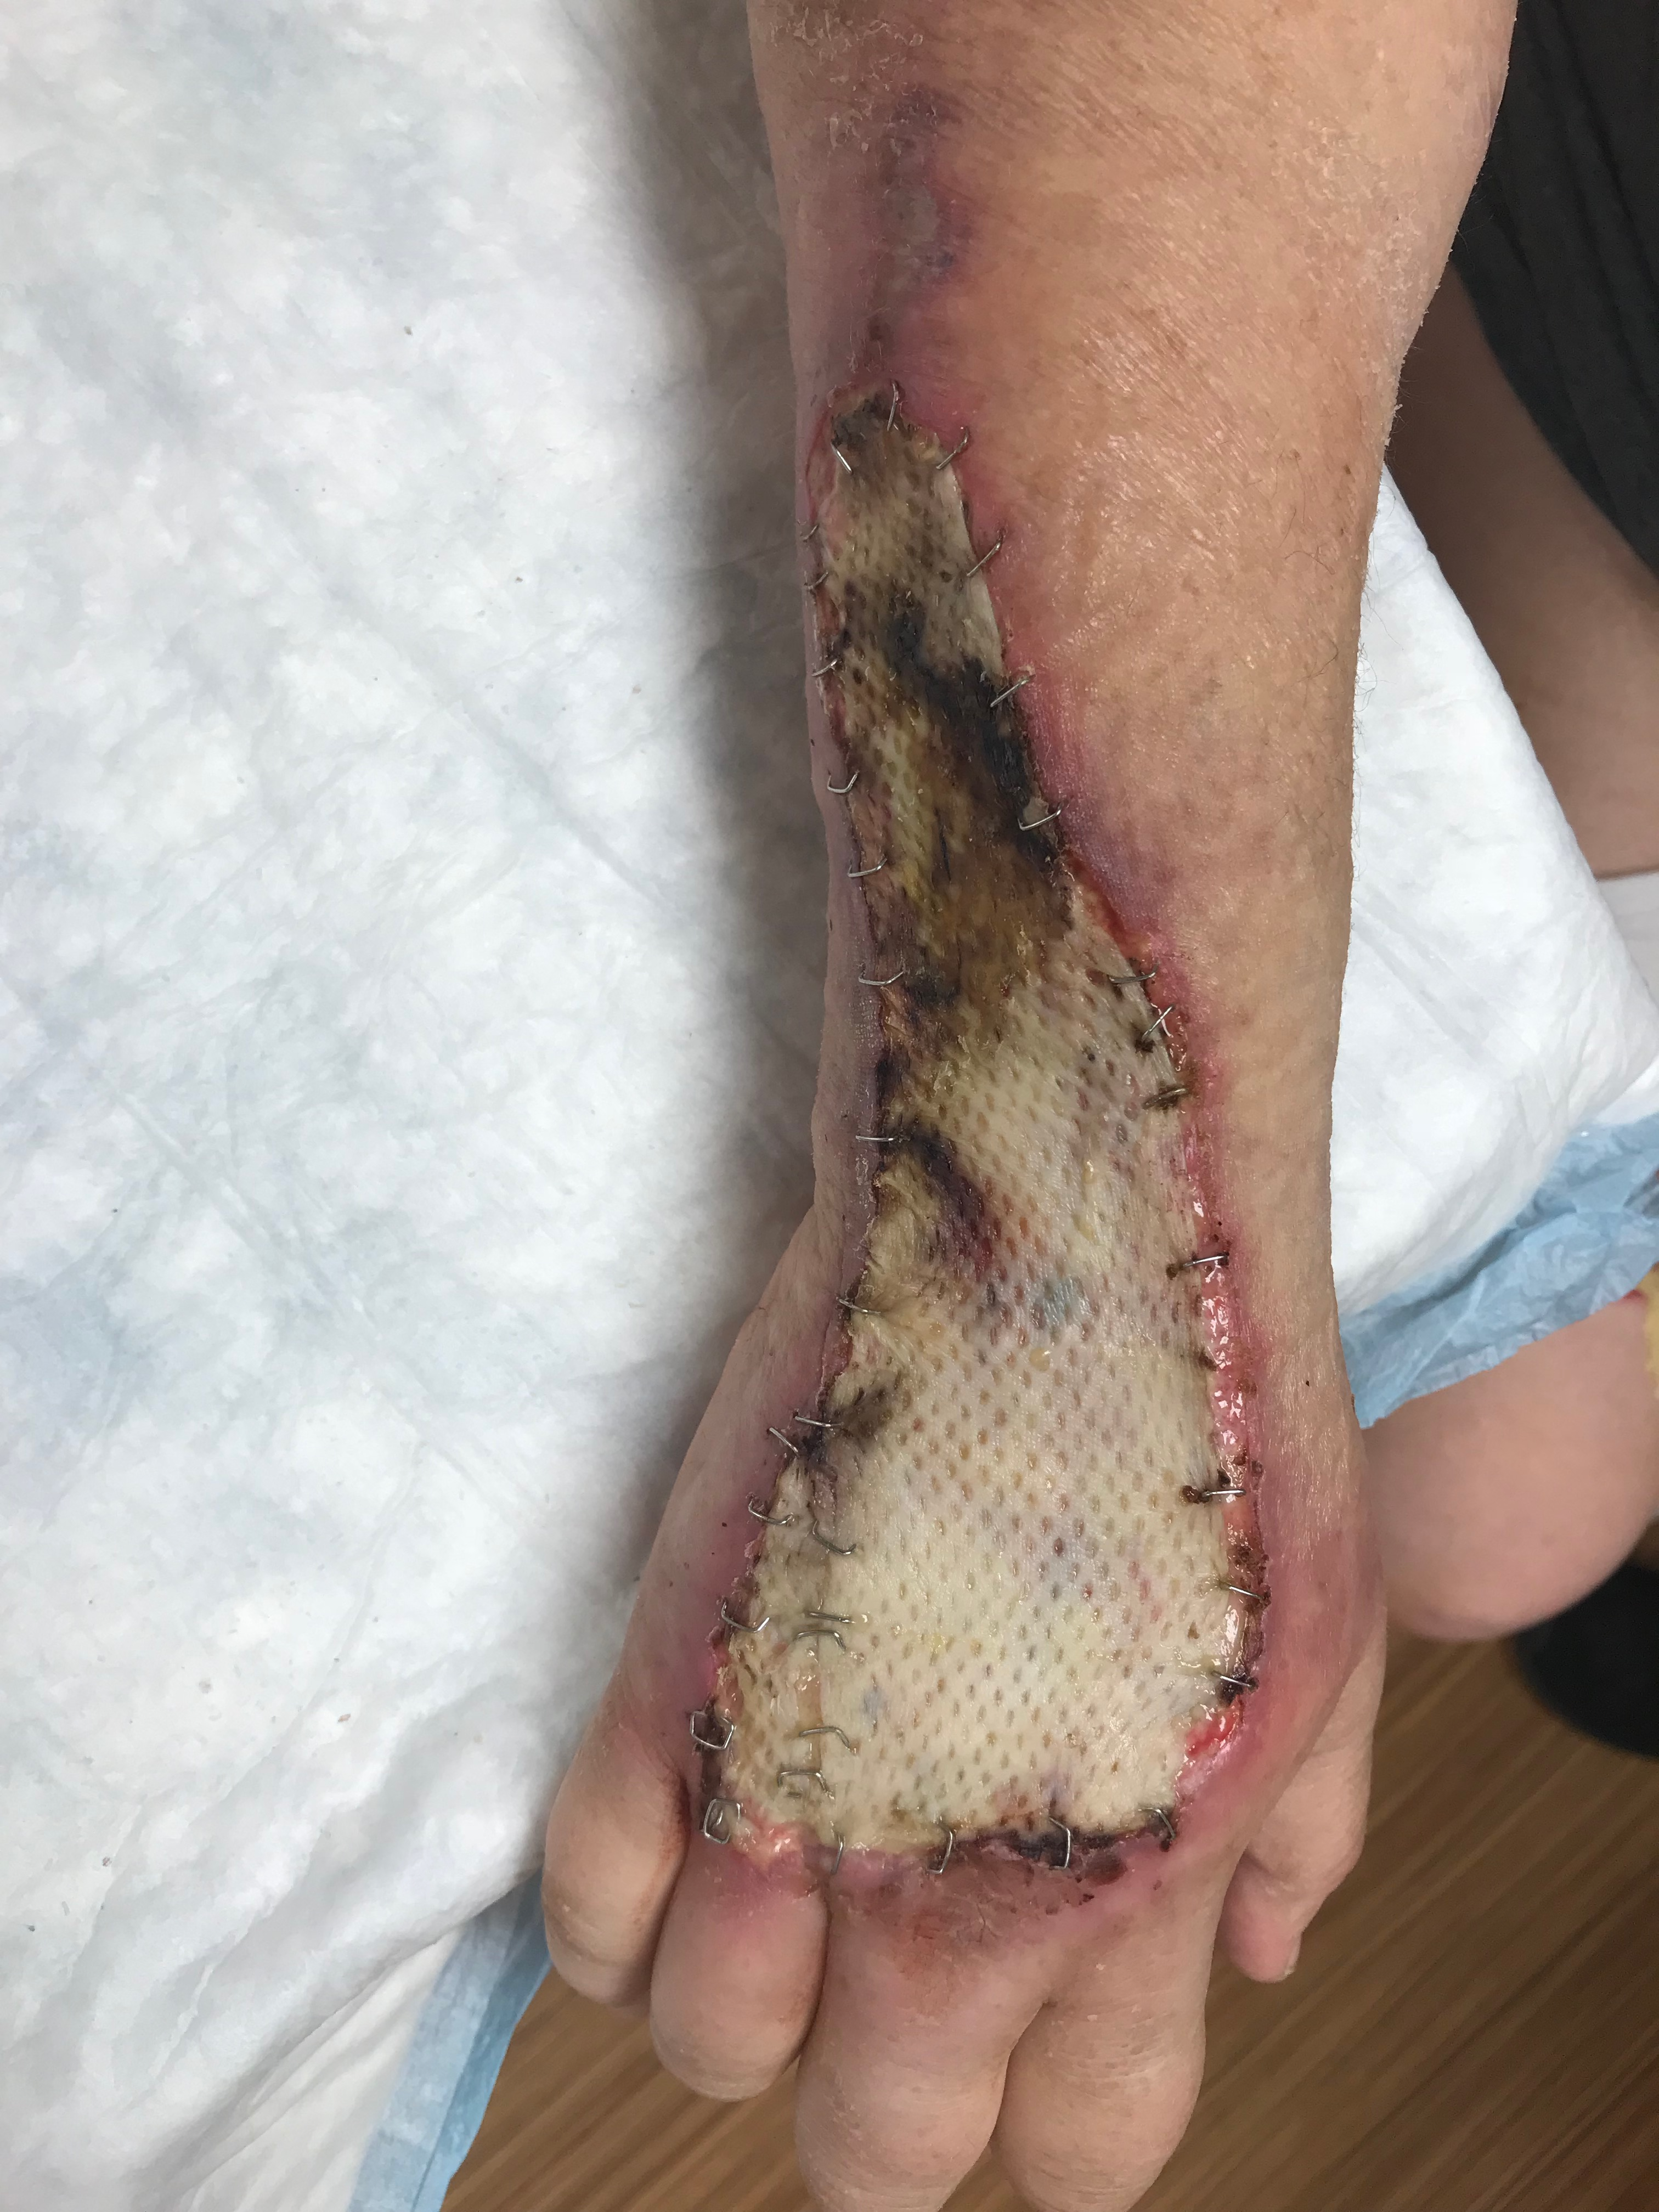 Non-viable split-thickness skin graft to right dorsal hand and wrist.